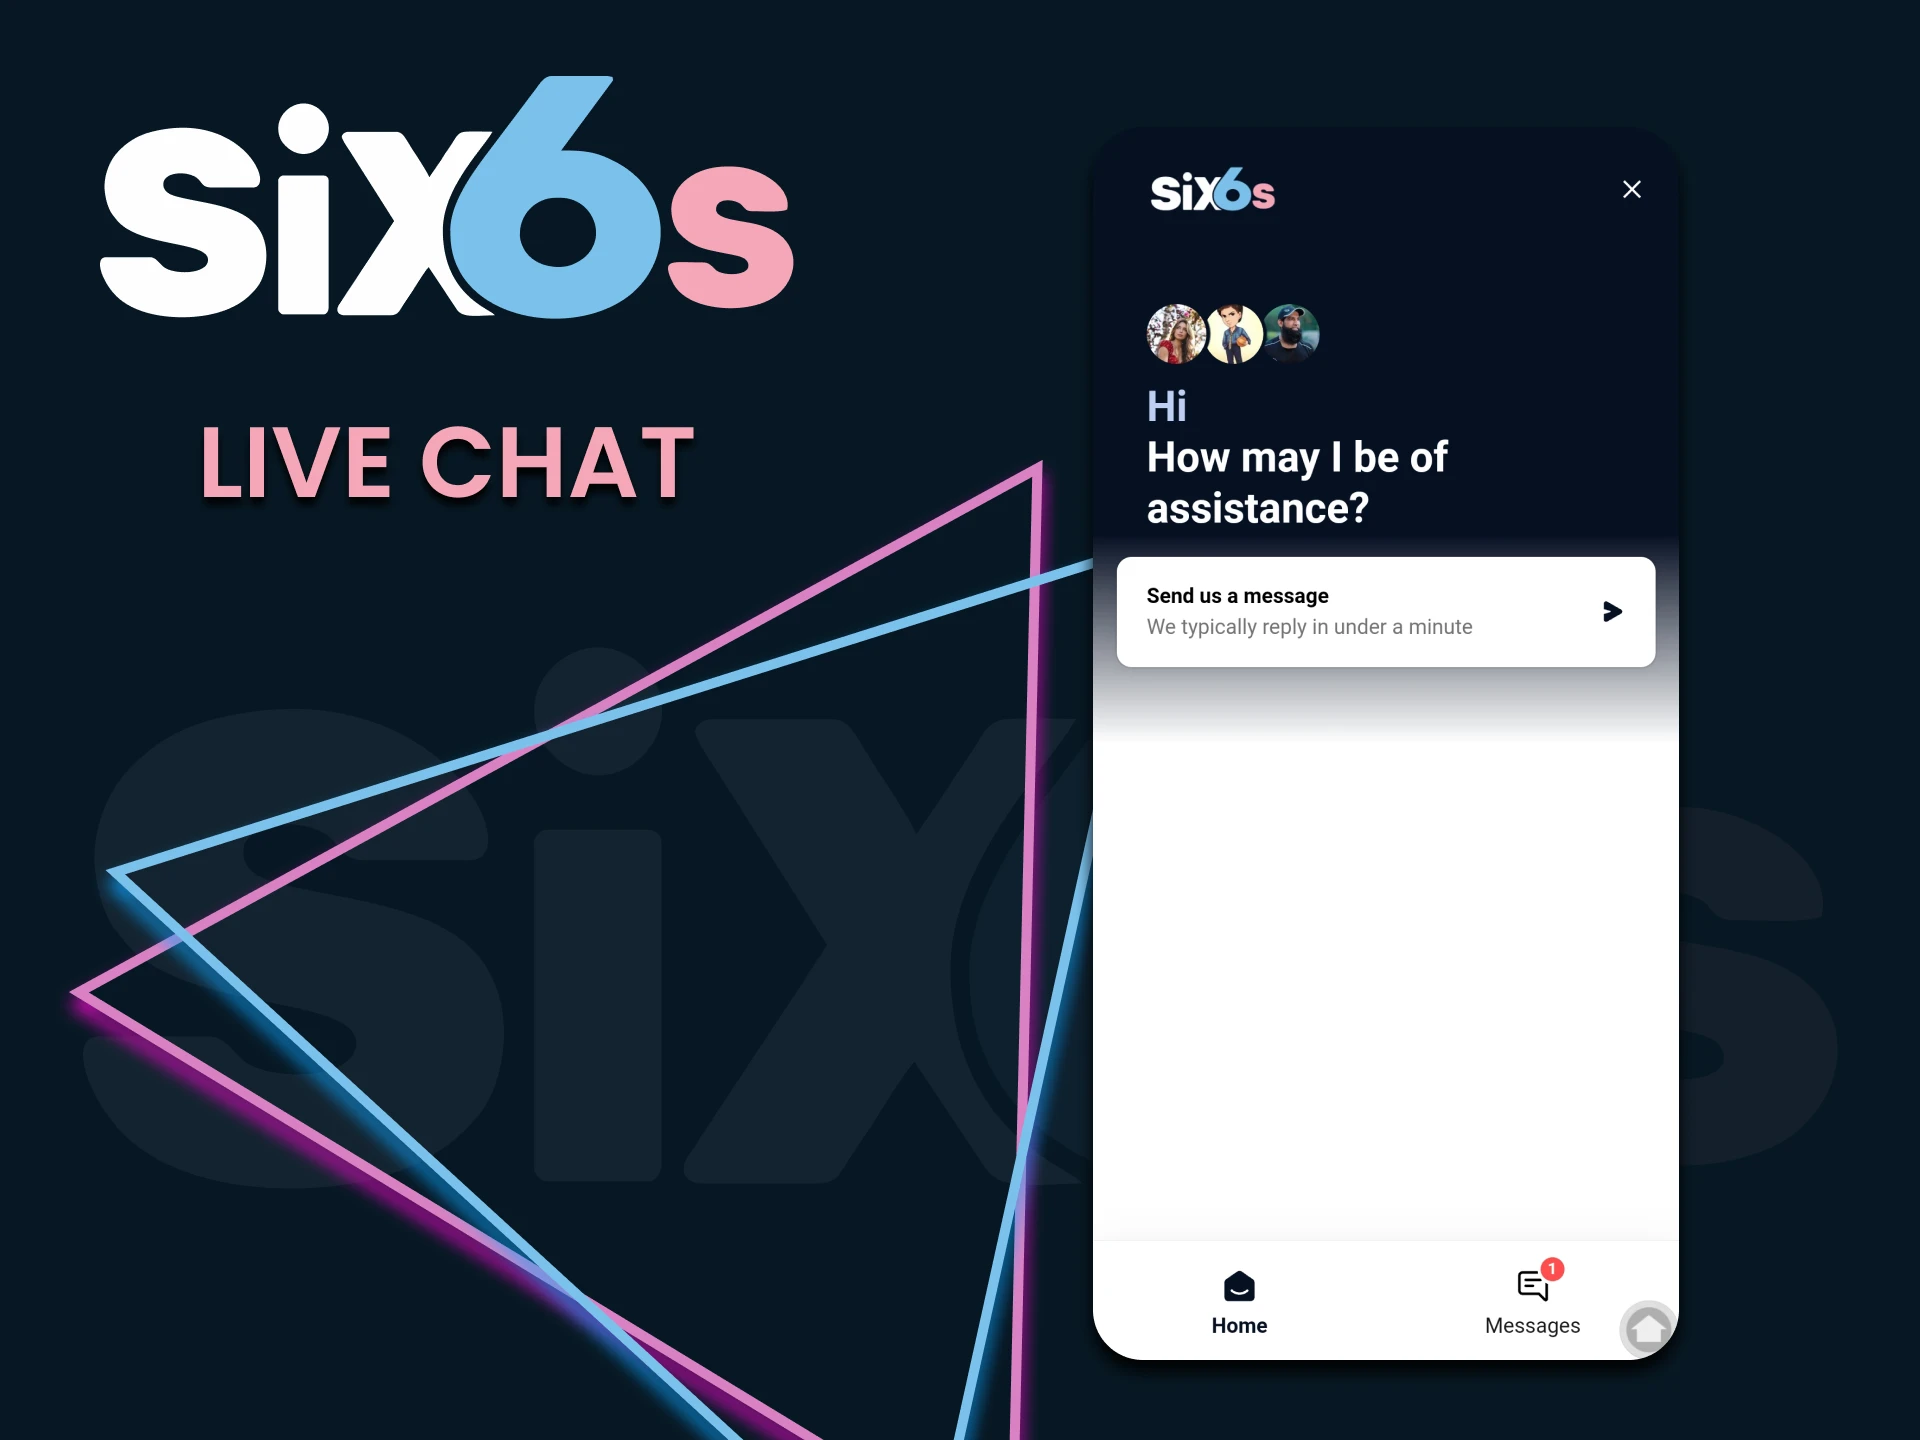 Use Live Chat to contact Six6s.